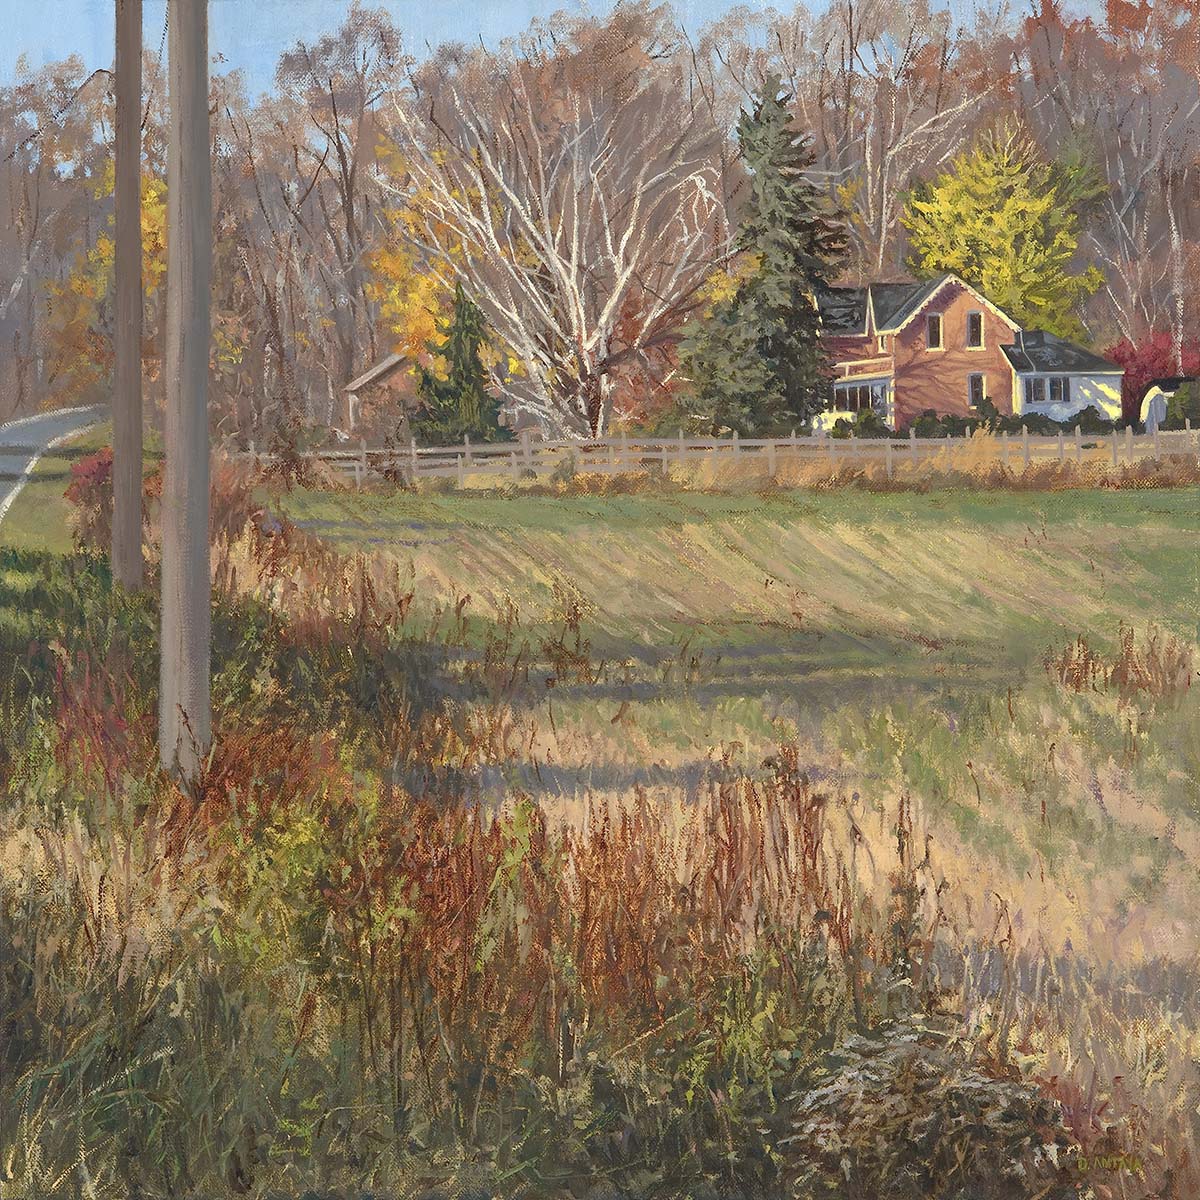 oil paitning of house in background surrounded by rural land, trees and bushes, grass